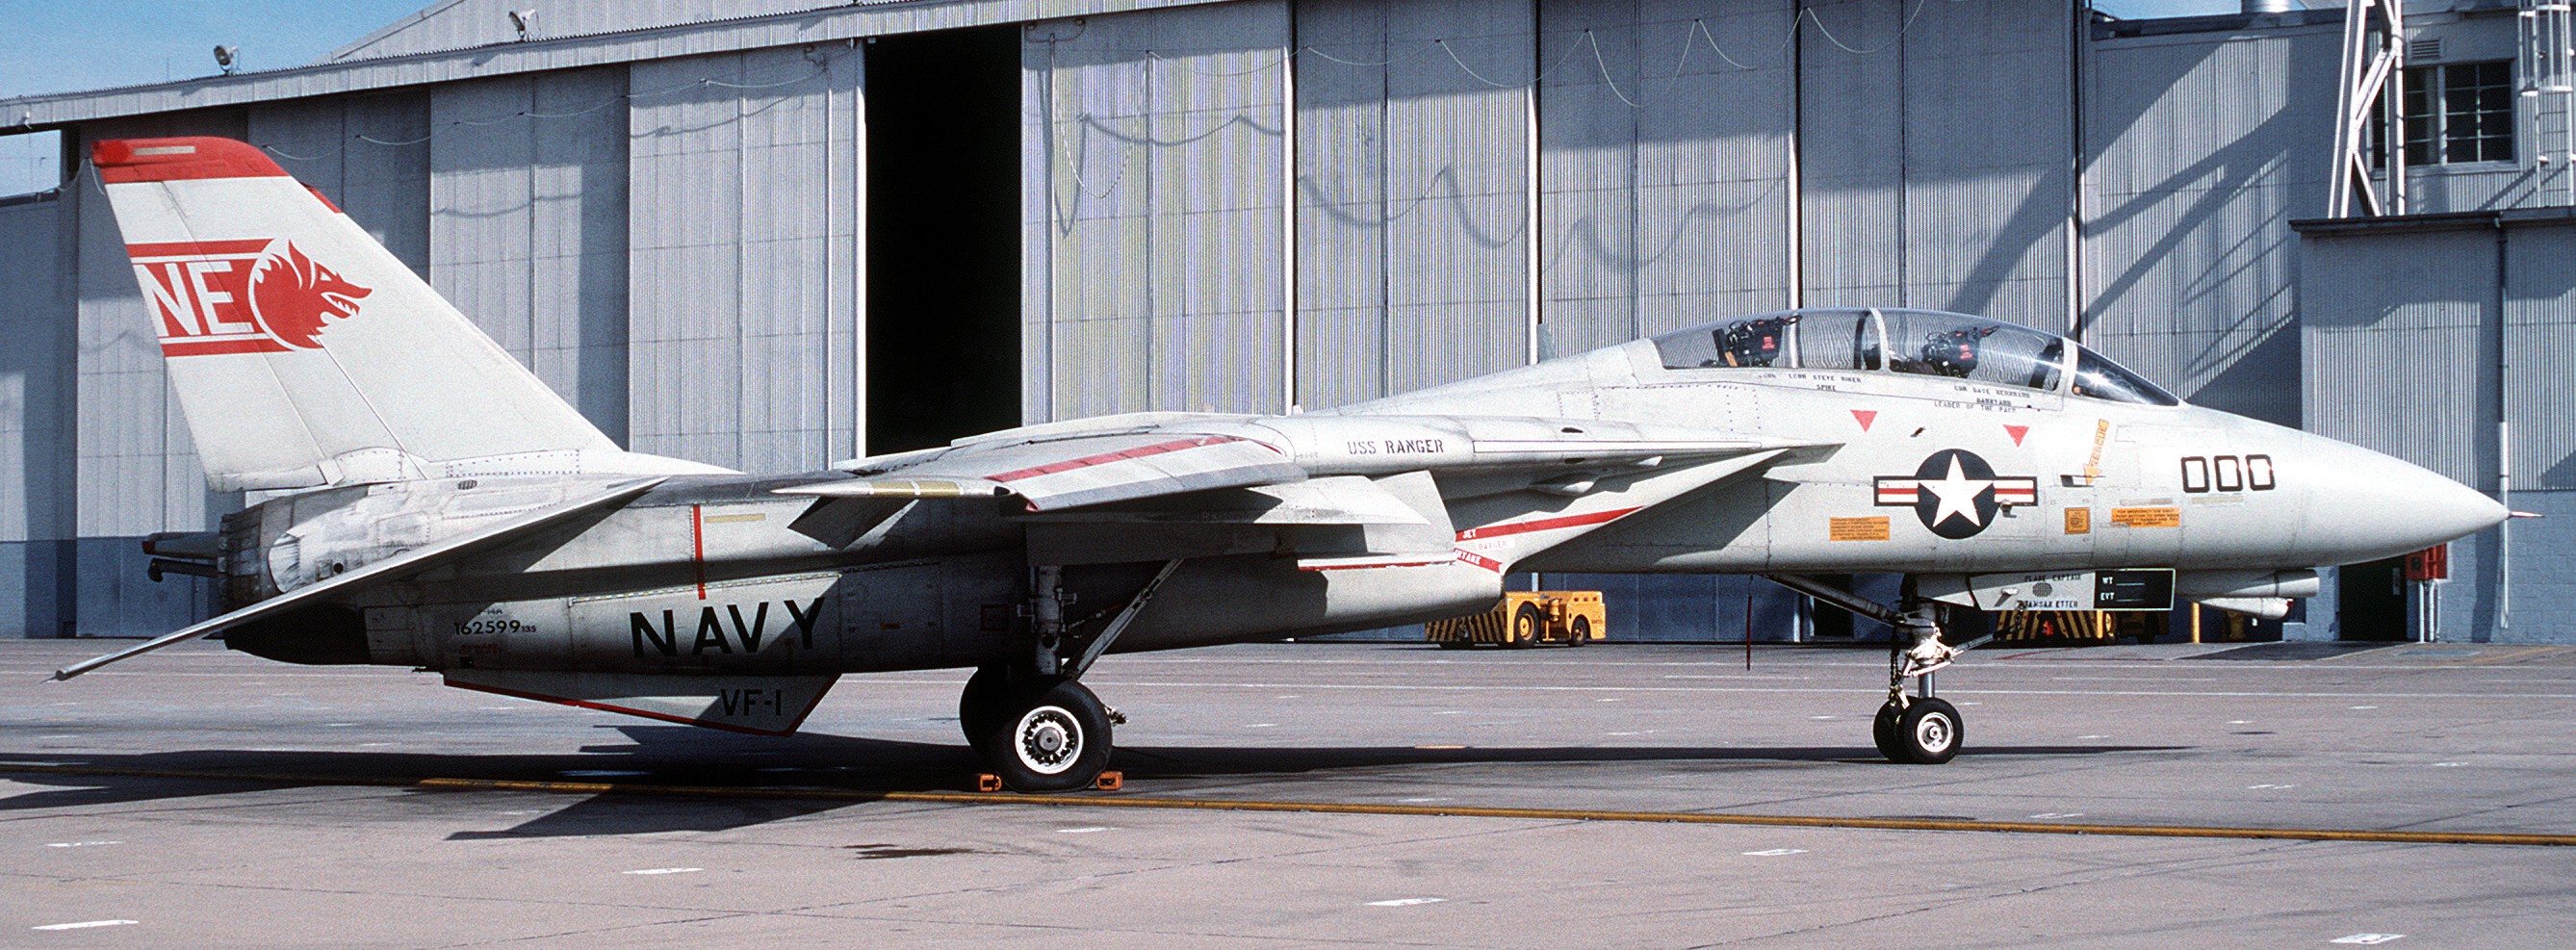 vf-1 wolfpack fighter squadron f-14a tomcat carrier air wing cvw-2 60 nas miramar california